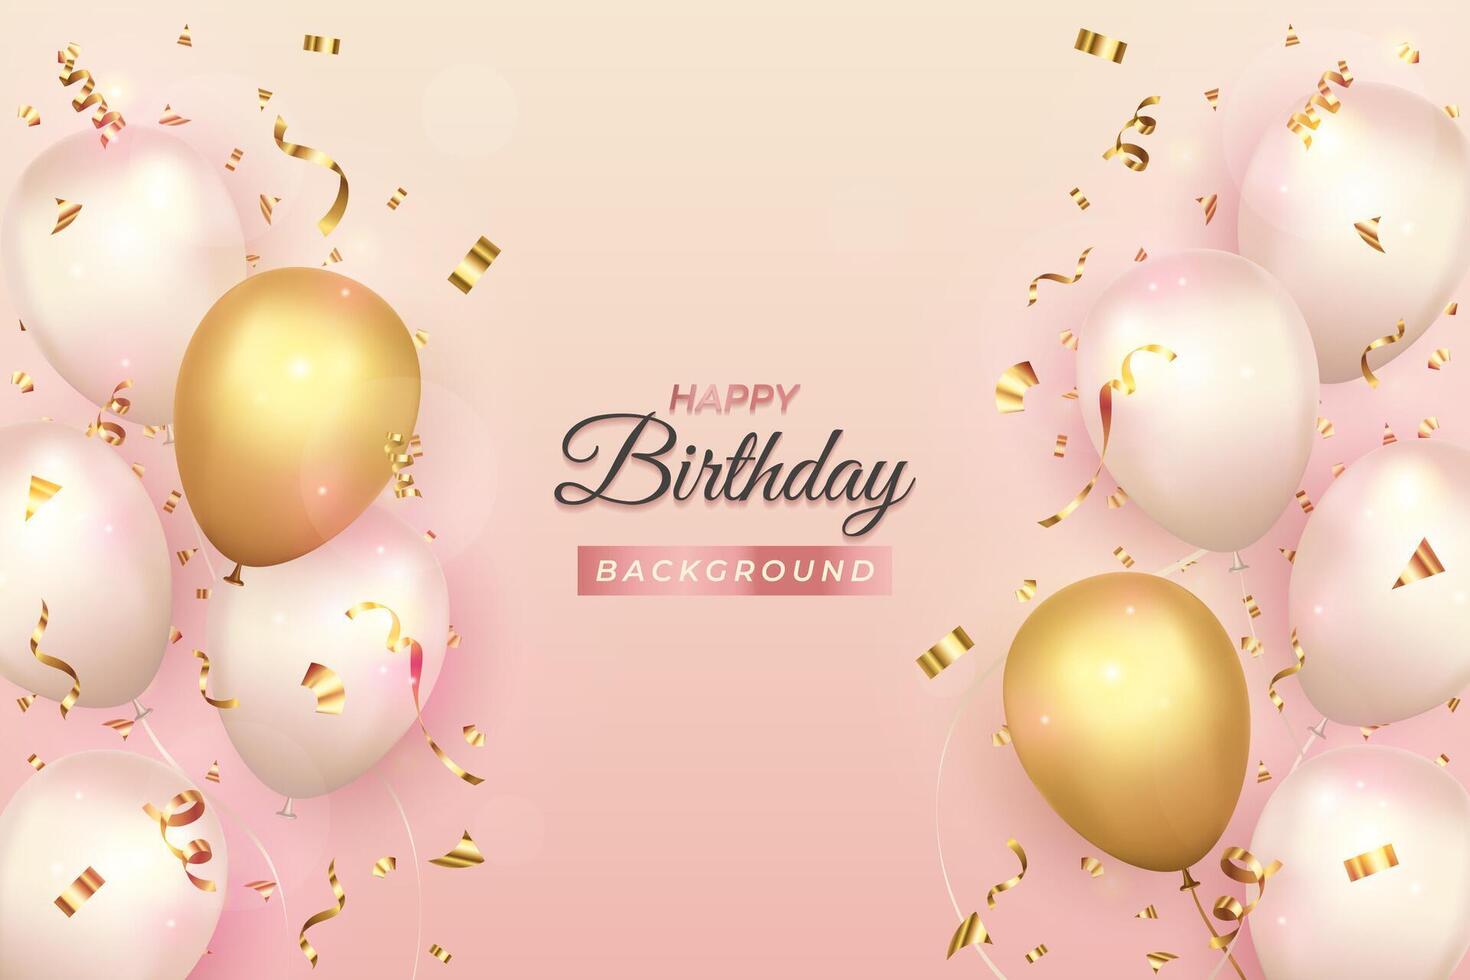 Happy Birthday with Realistic Balloon Background vector